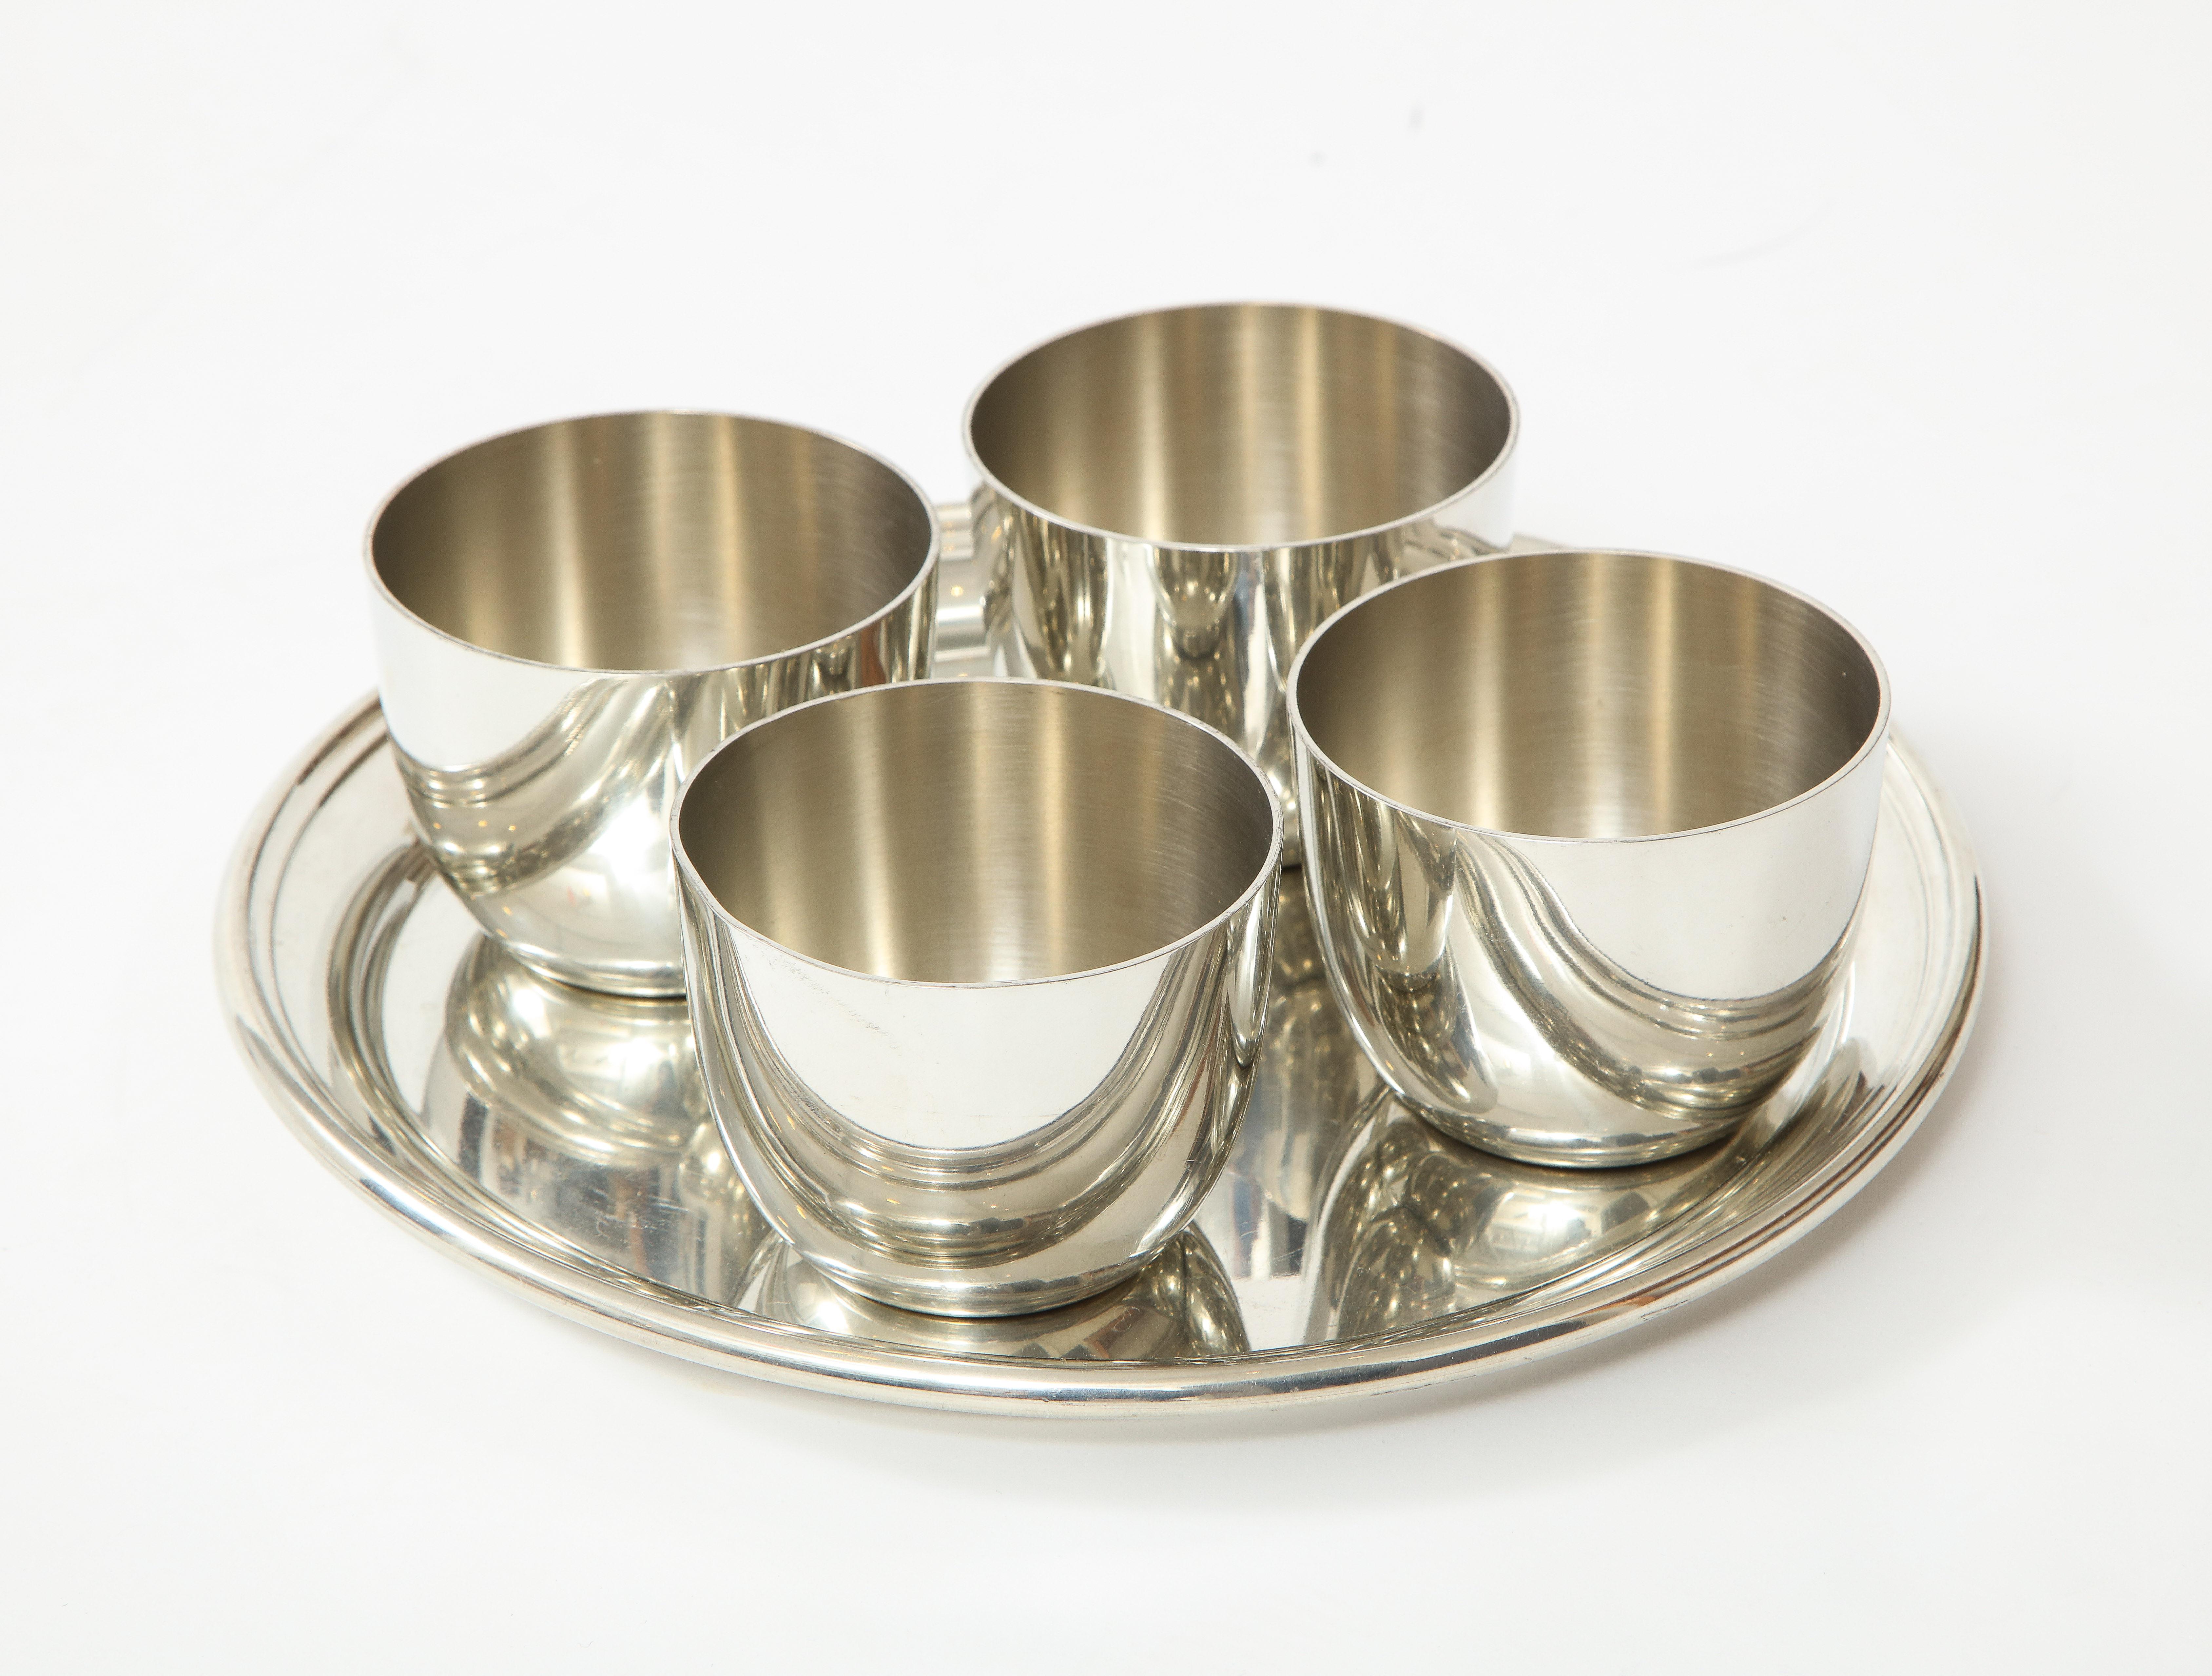 Wonderful midcentury set of pewter cups and serving tray, platter. Stamped.

Tray measures 10 inches in diameter x .5 deep
Cups measure 3.25 inchres in diameter x 2.5 inches tall